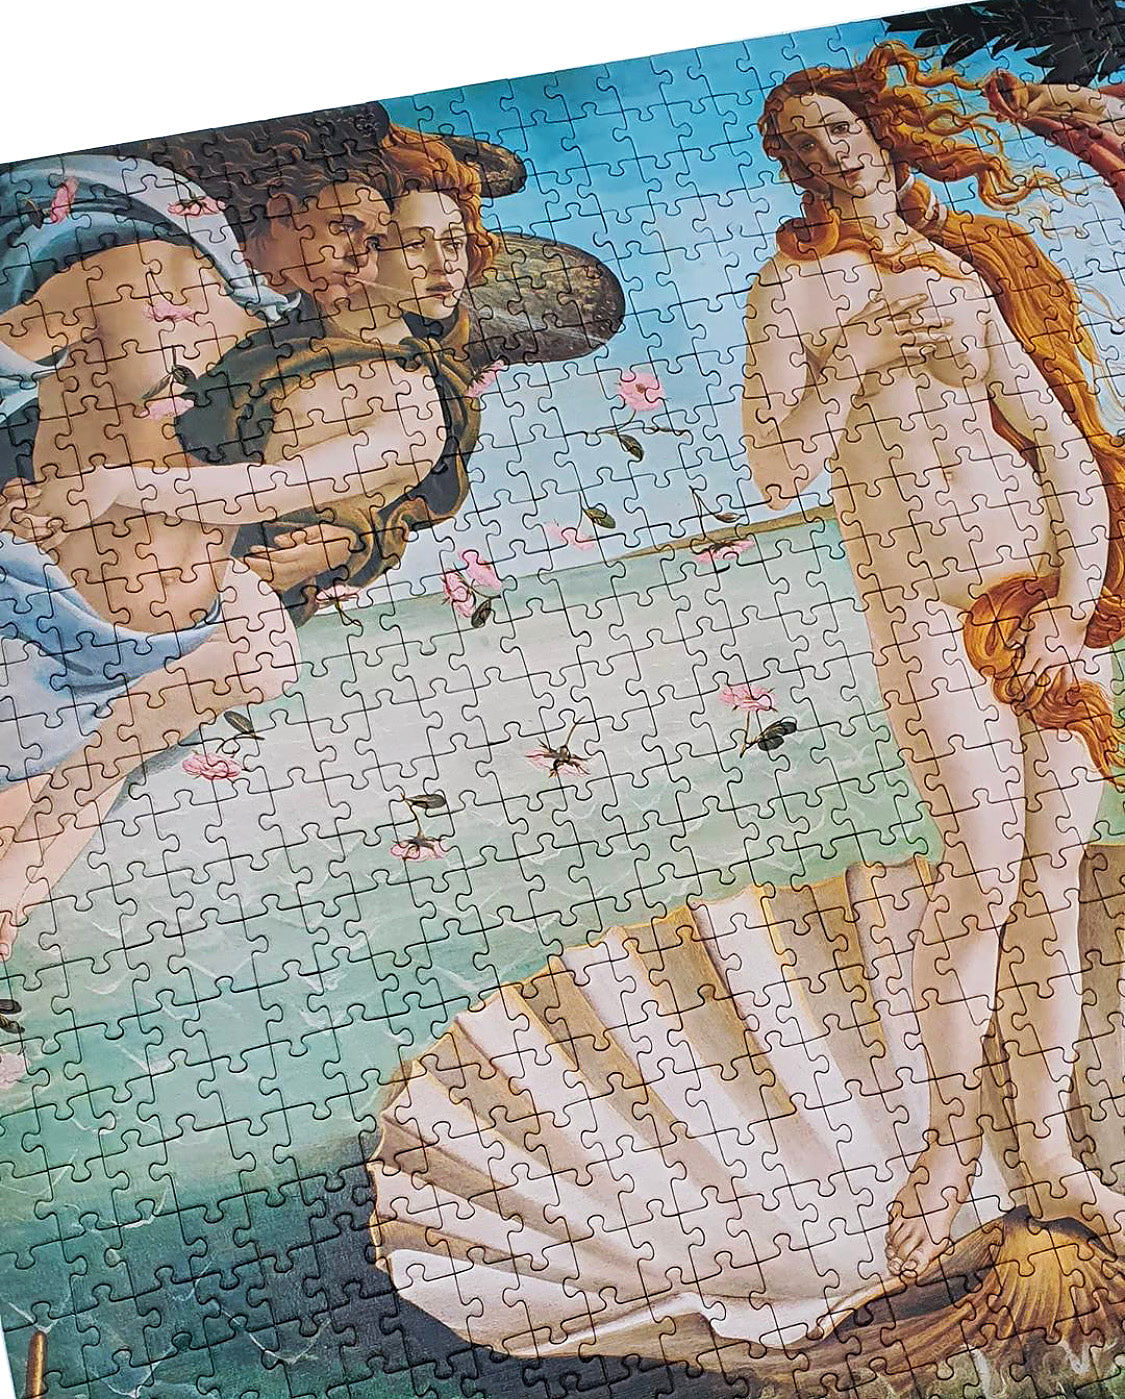 Museum lover? This artsy puzzle featuring the painting The Birth of Venus by Sandro Botticelli. Putting it together is like preparing an art gallery for a must-see exhibit of Renaissance art.